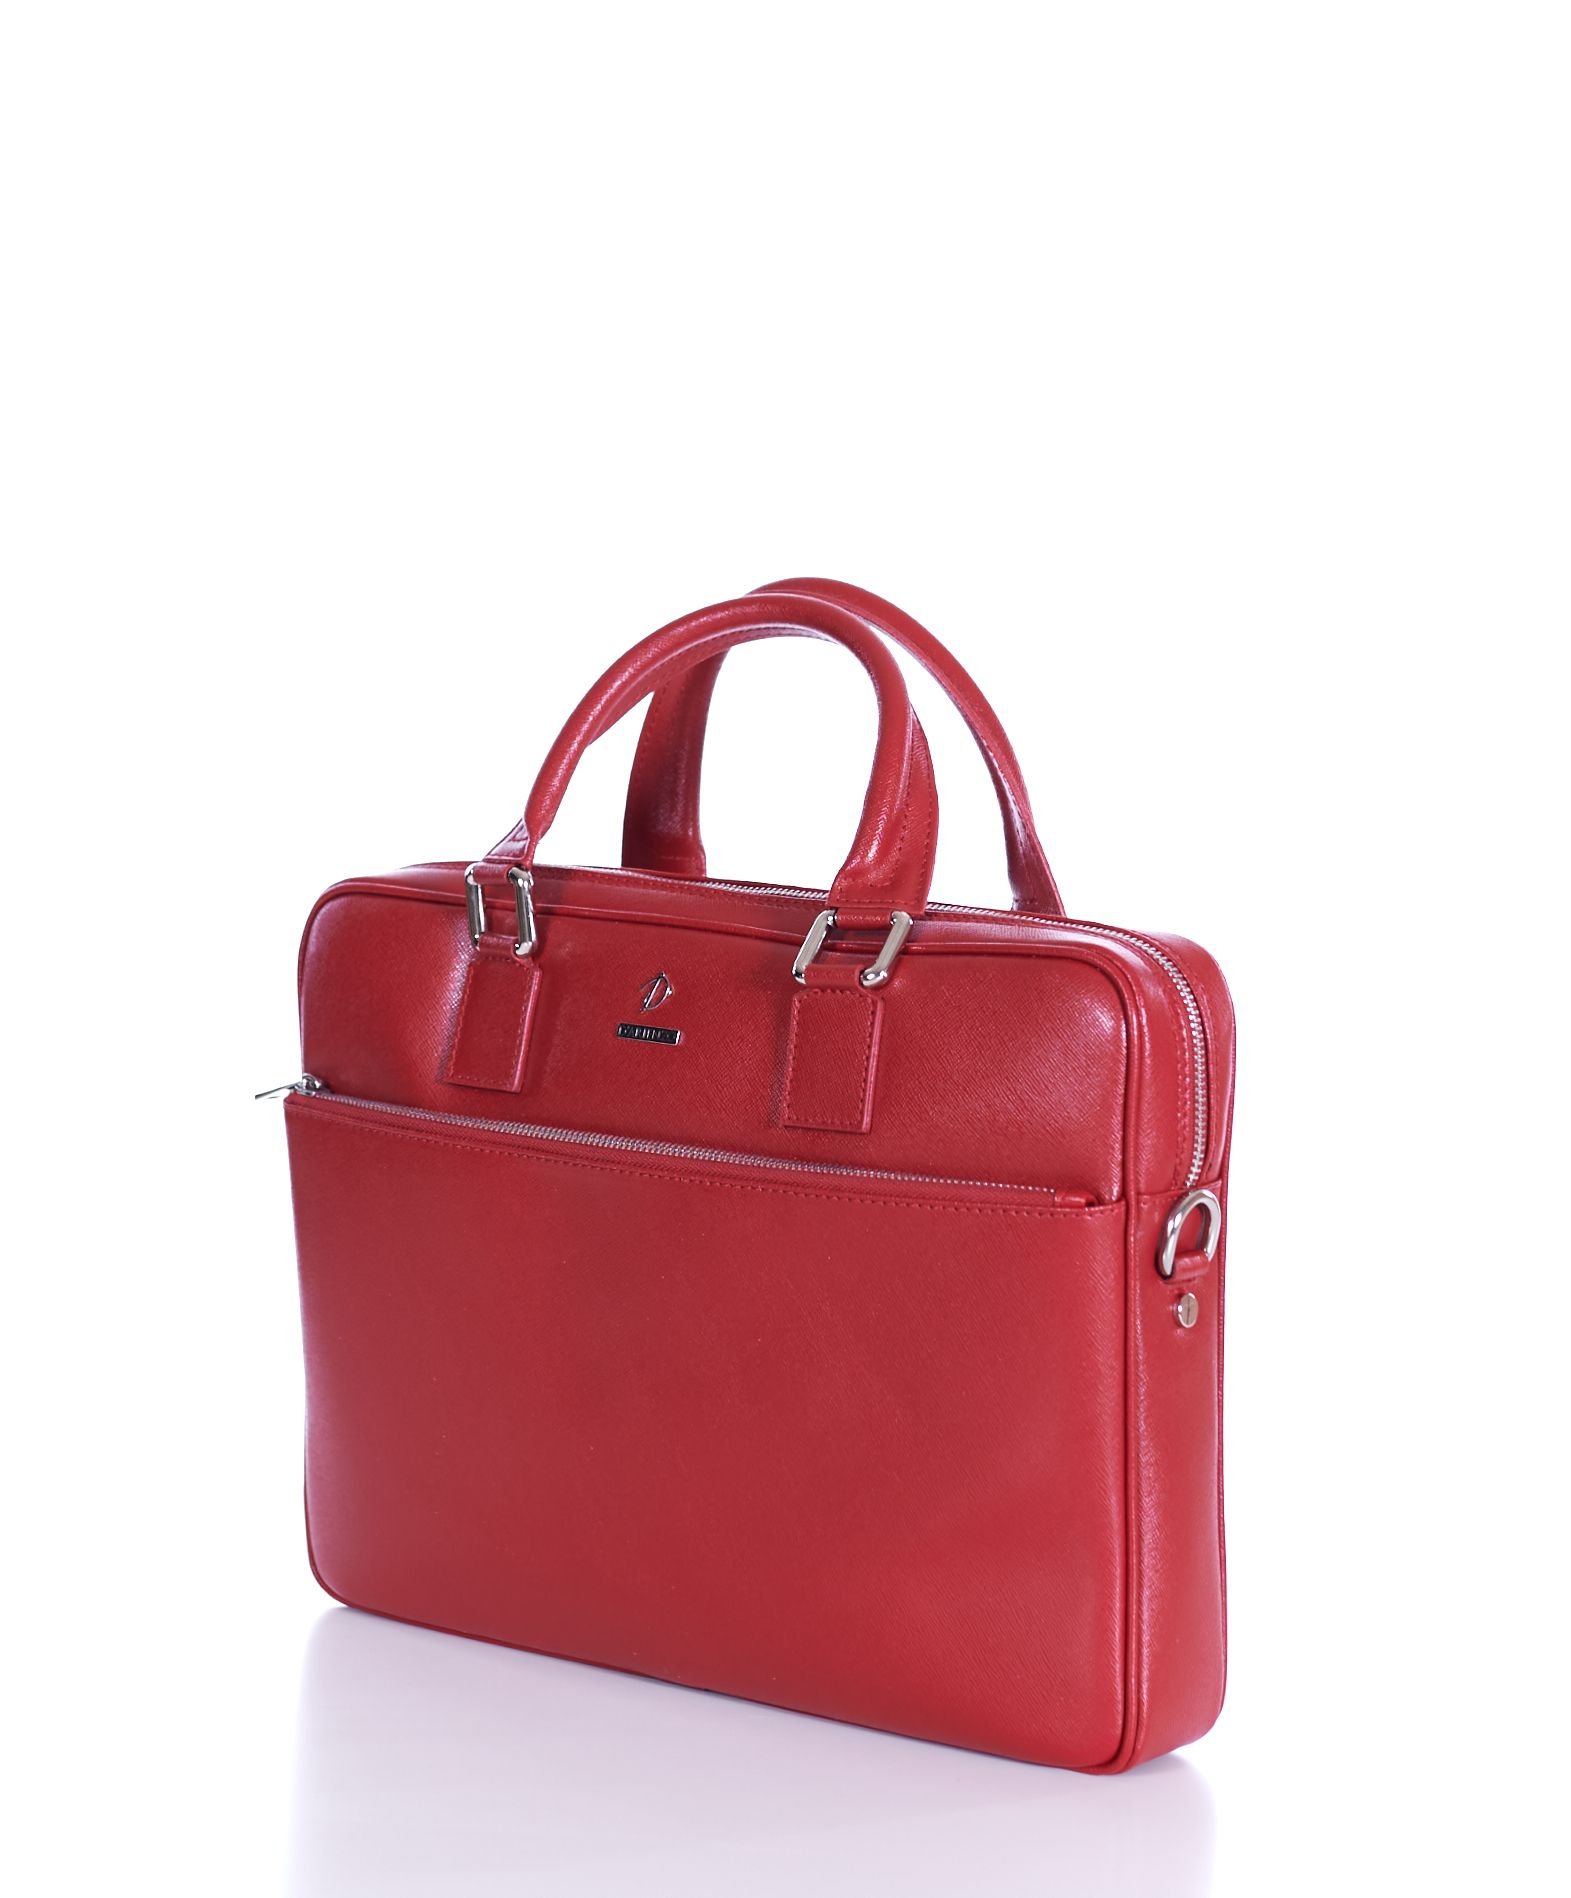 Italian work leather business briefcase laptop pc bag red Dylan 